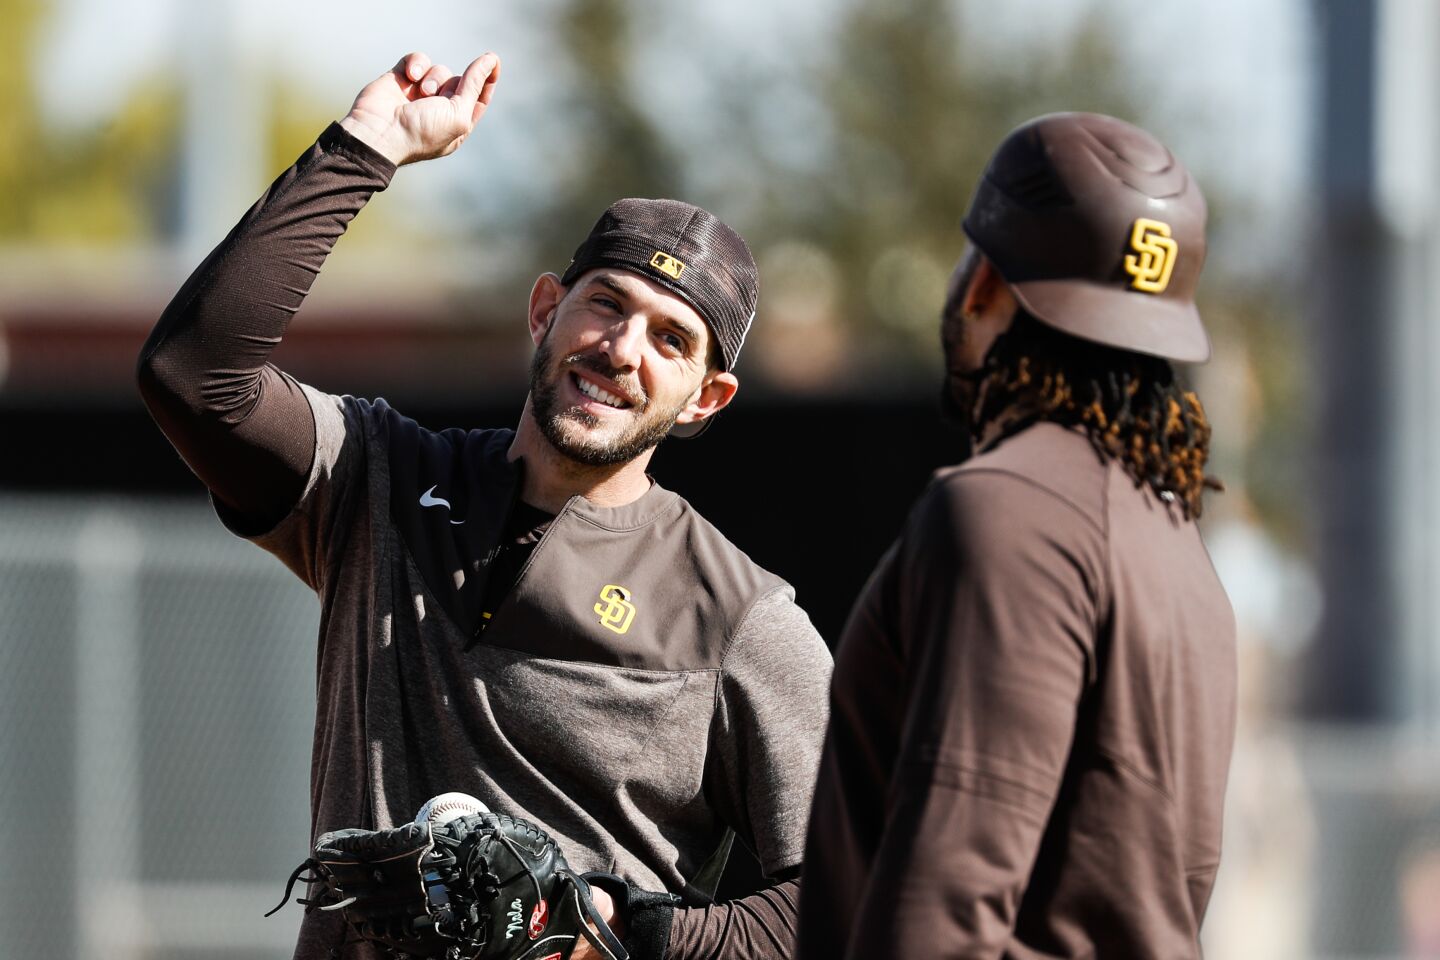 Padres catchers Austin Nola (26) and Luis Campusano (12) chat during a spring training practice at the Peoria Sports Complex on Sunday, Feb. 19, 2023 in Peoria, AZ.